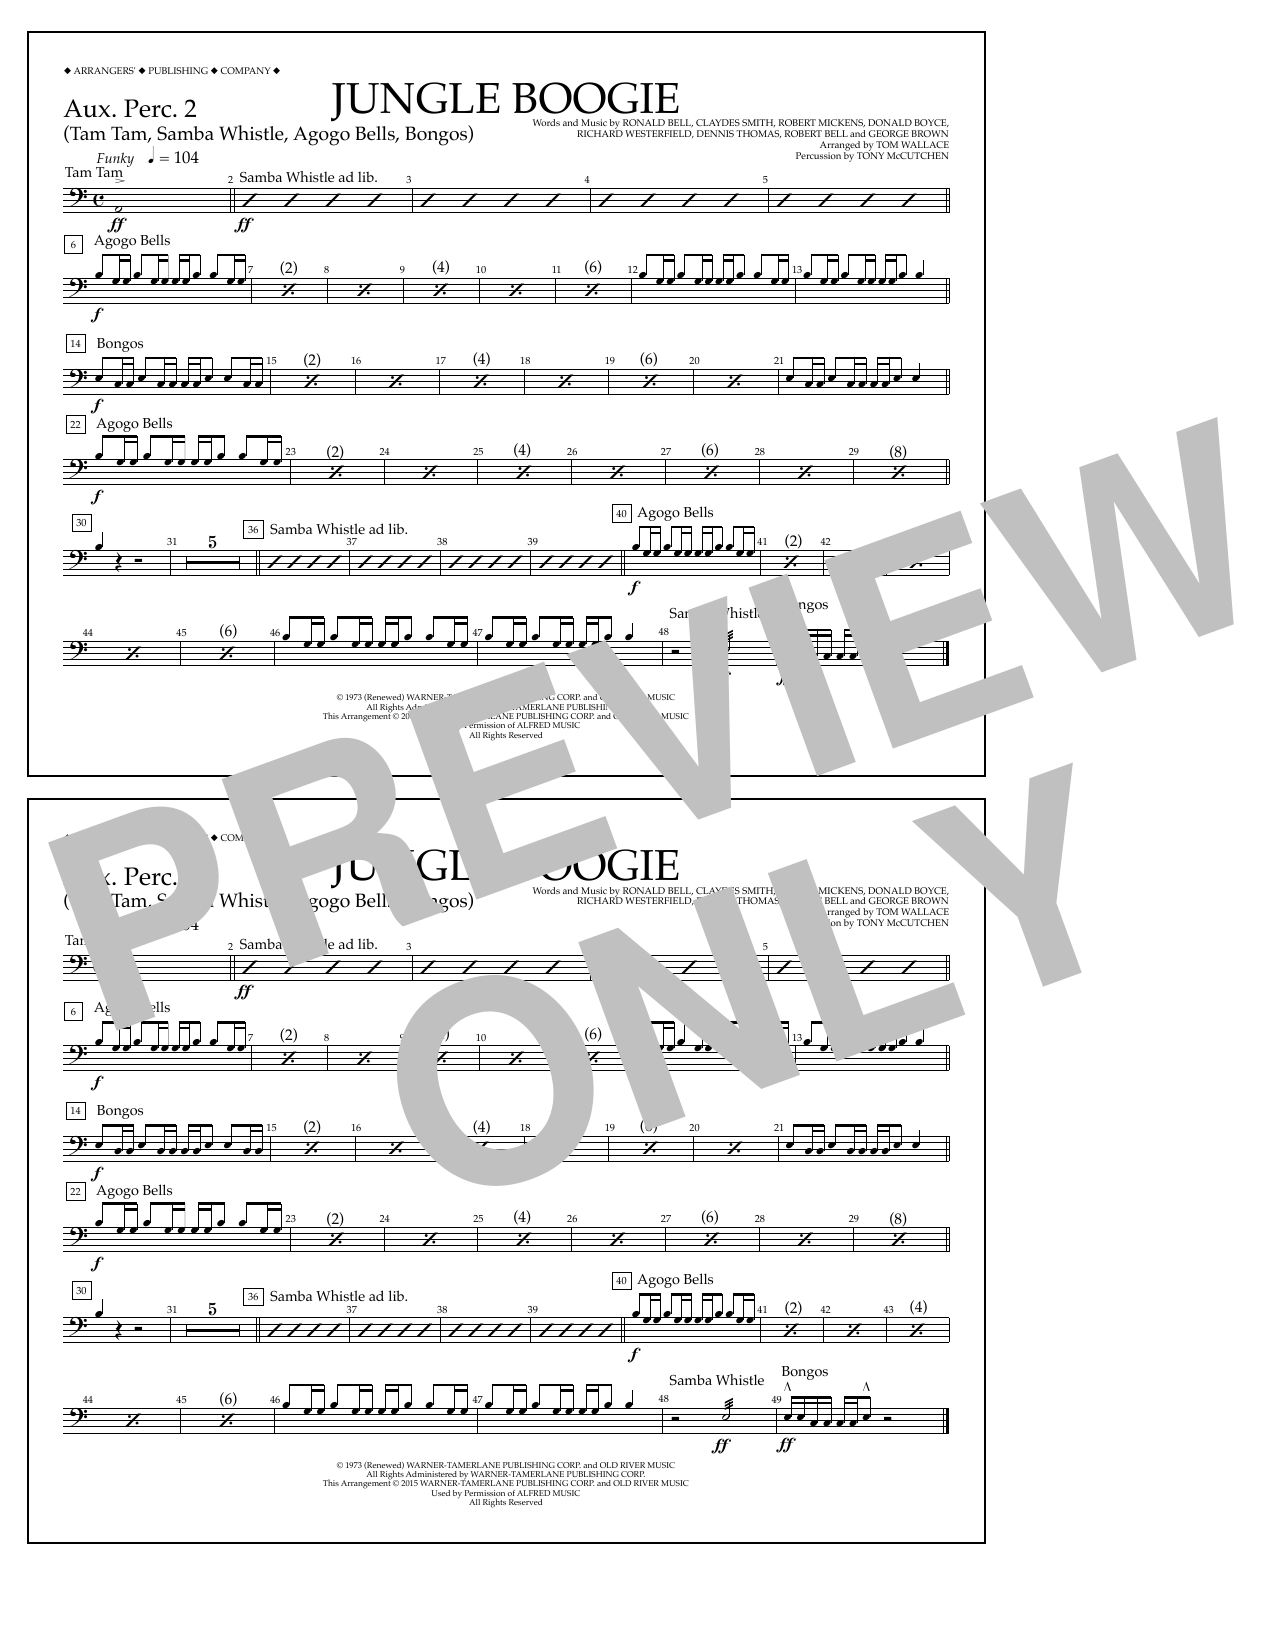 Download Tom Wallace Jungle Boogie - Aux. Perc. 2 Sheet Music